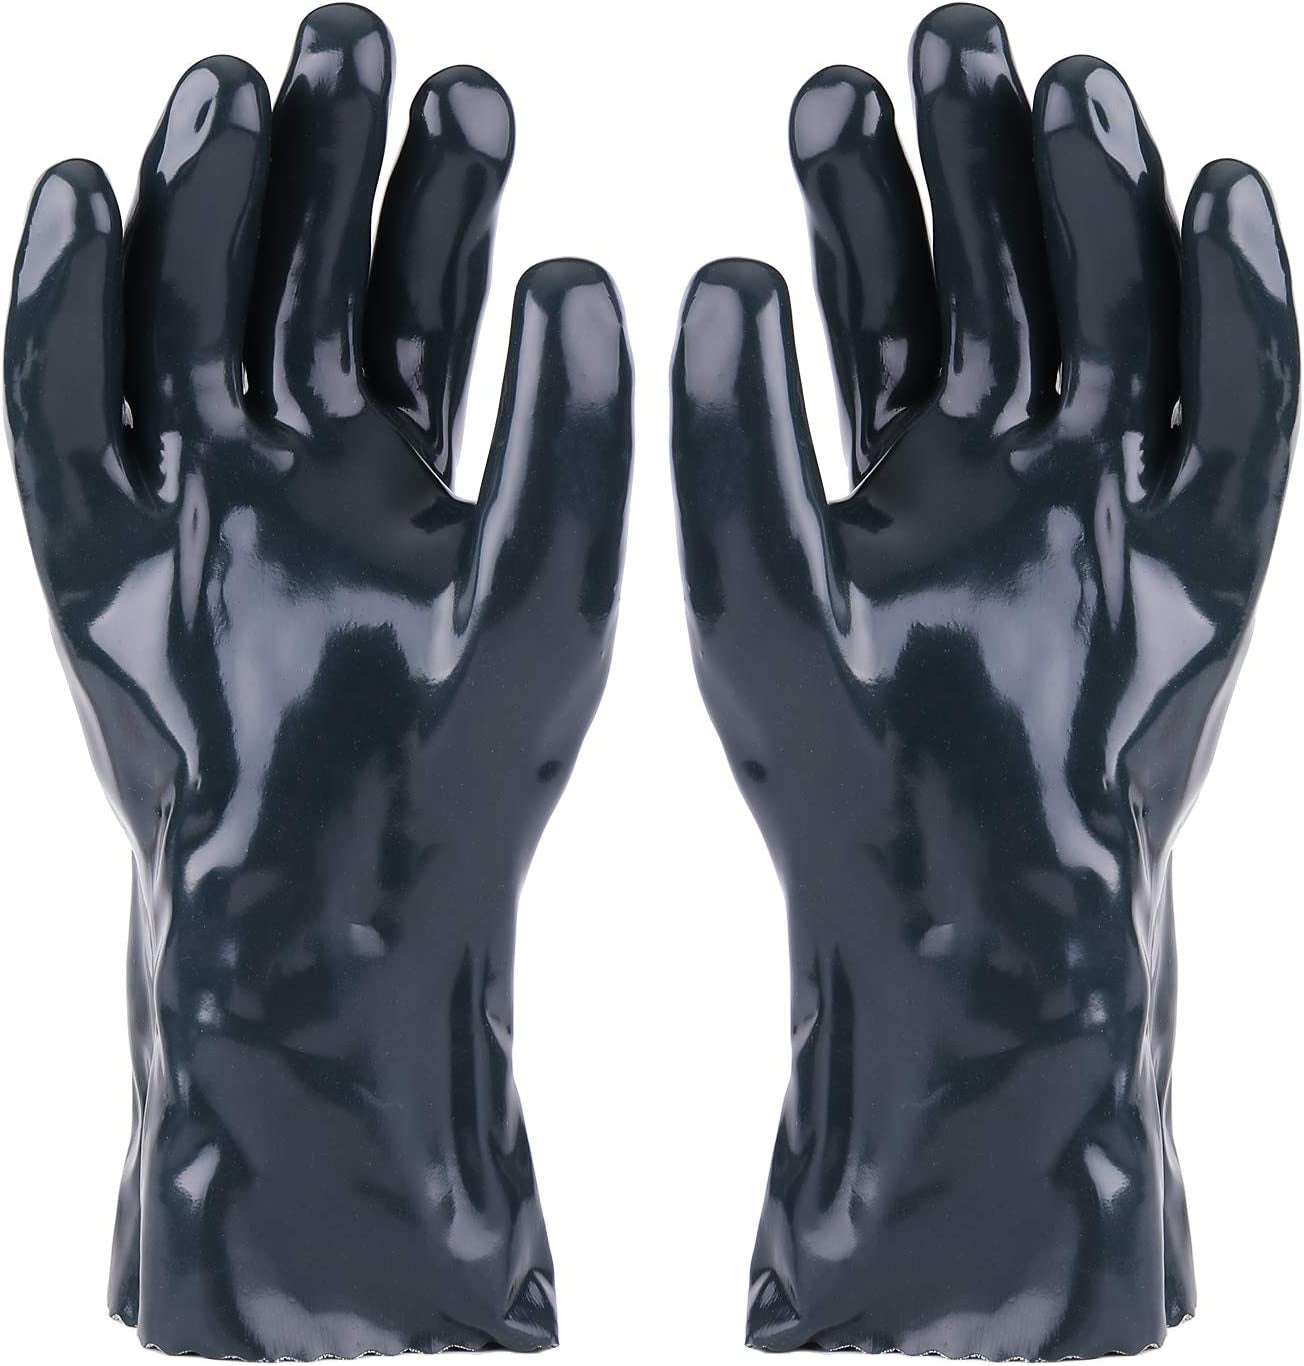 Flexzion, Flexzion BBQ Gloves Hot Food Gloves (1 Pair) - Griller Insulated Heat-Resistant Neoprene Durable and Reusable for Handling Hot Food Right off BBQ Grill Meat, Steak, Turkey, Pulling Pork